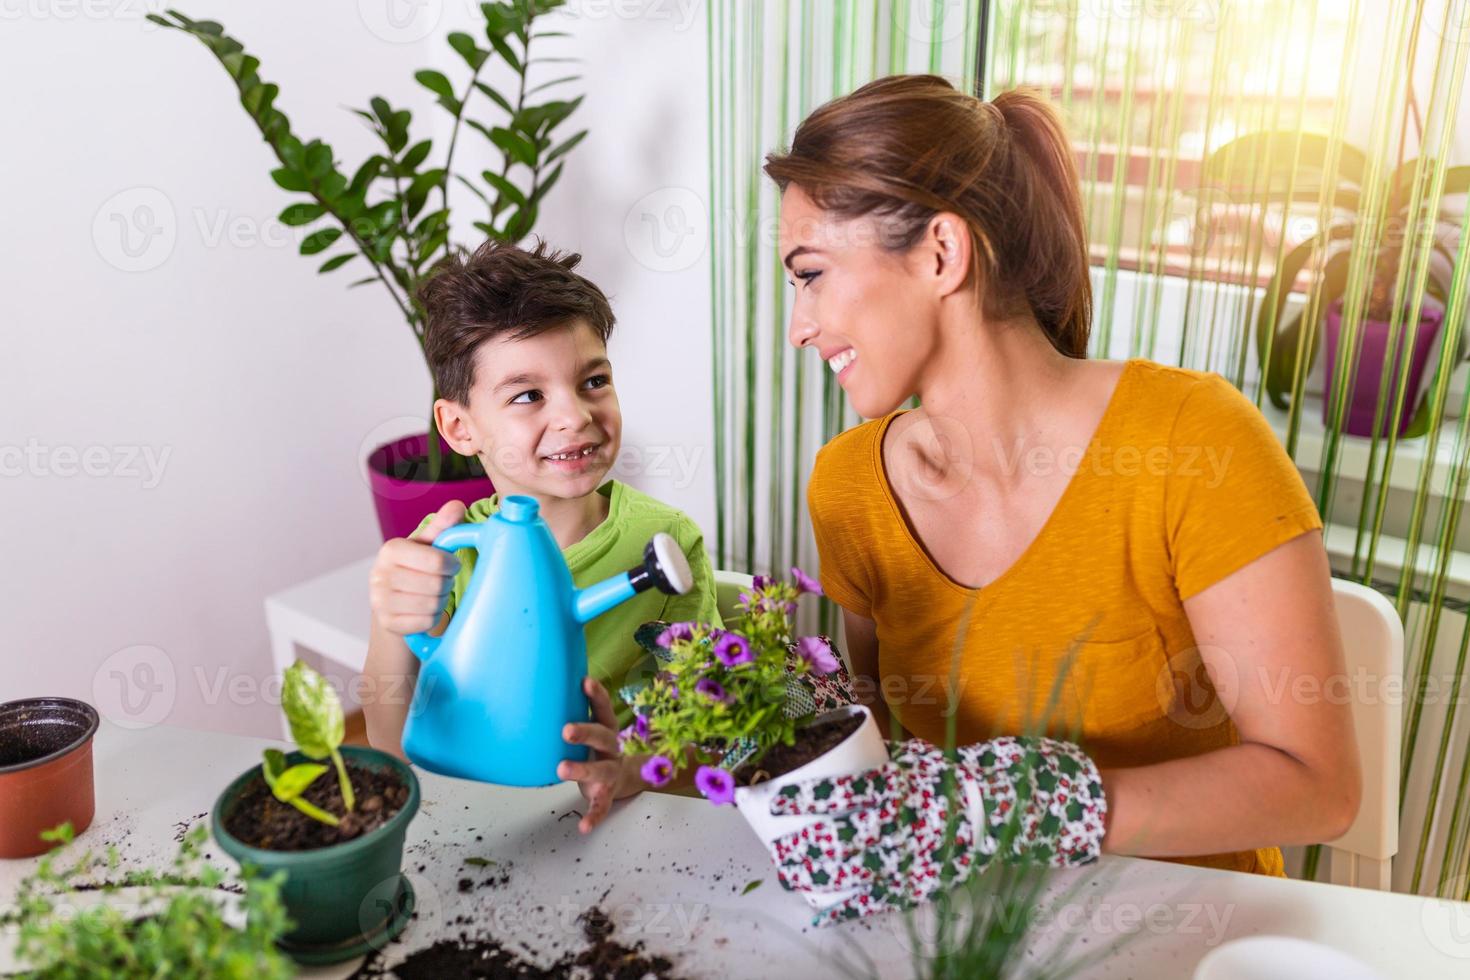 Mom and boy child water the plants together, Moms little gardener assistant, taking care of children and flowers. Cute boy watering from watering can, take care of trees and plants, wet child photo